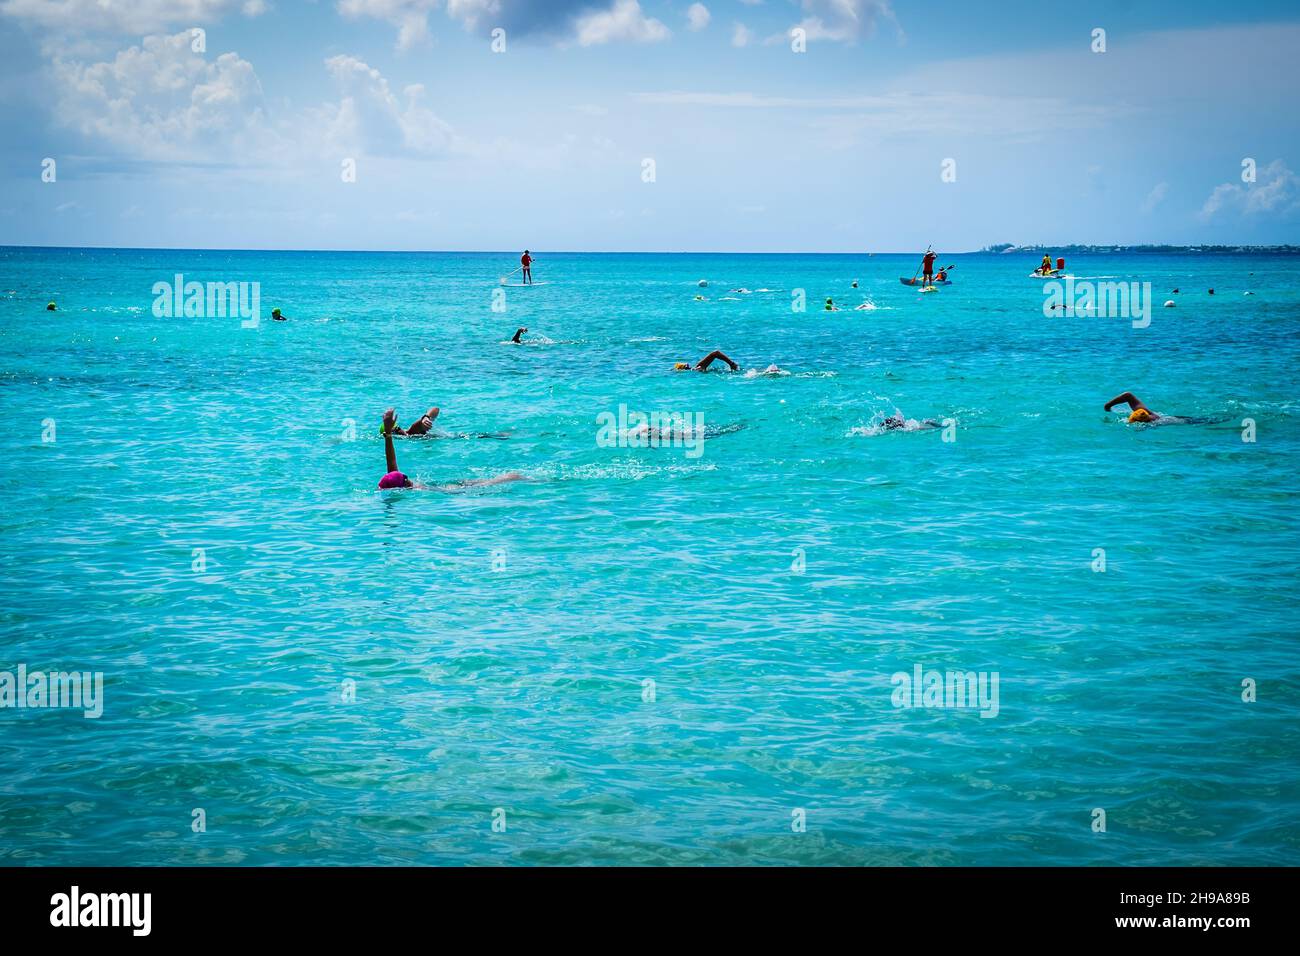 Swimmers in the Caribbean Sea during a competition by Seven Mile Beach, Grand Cayman, Cayman Islands Stock Photo